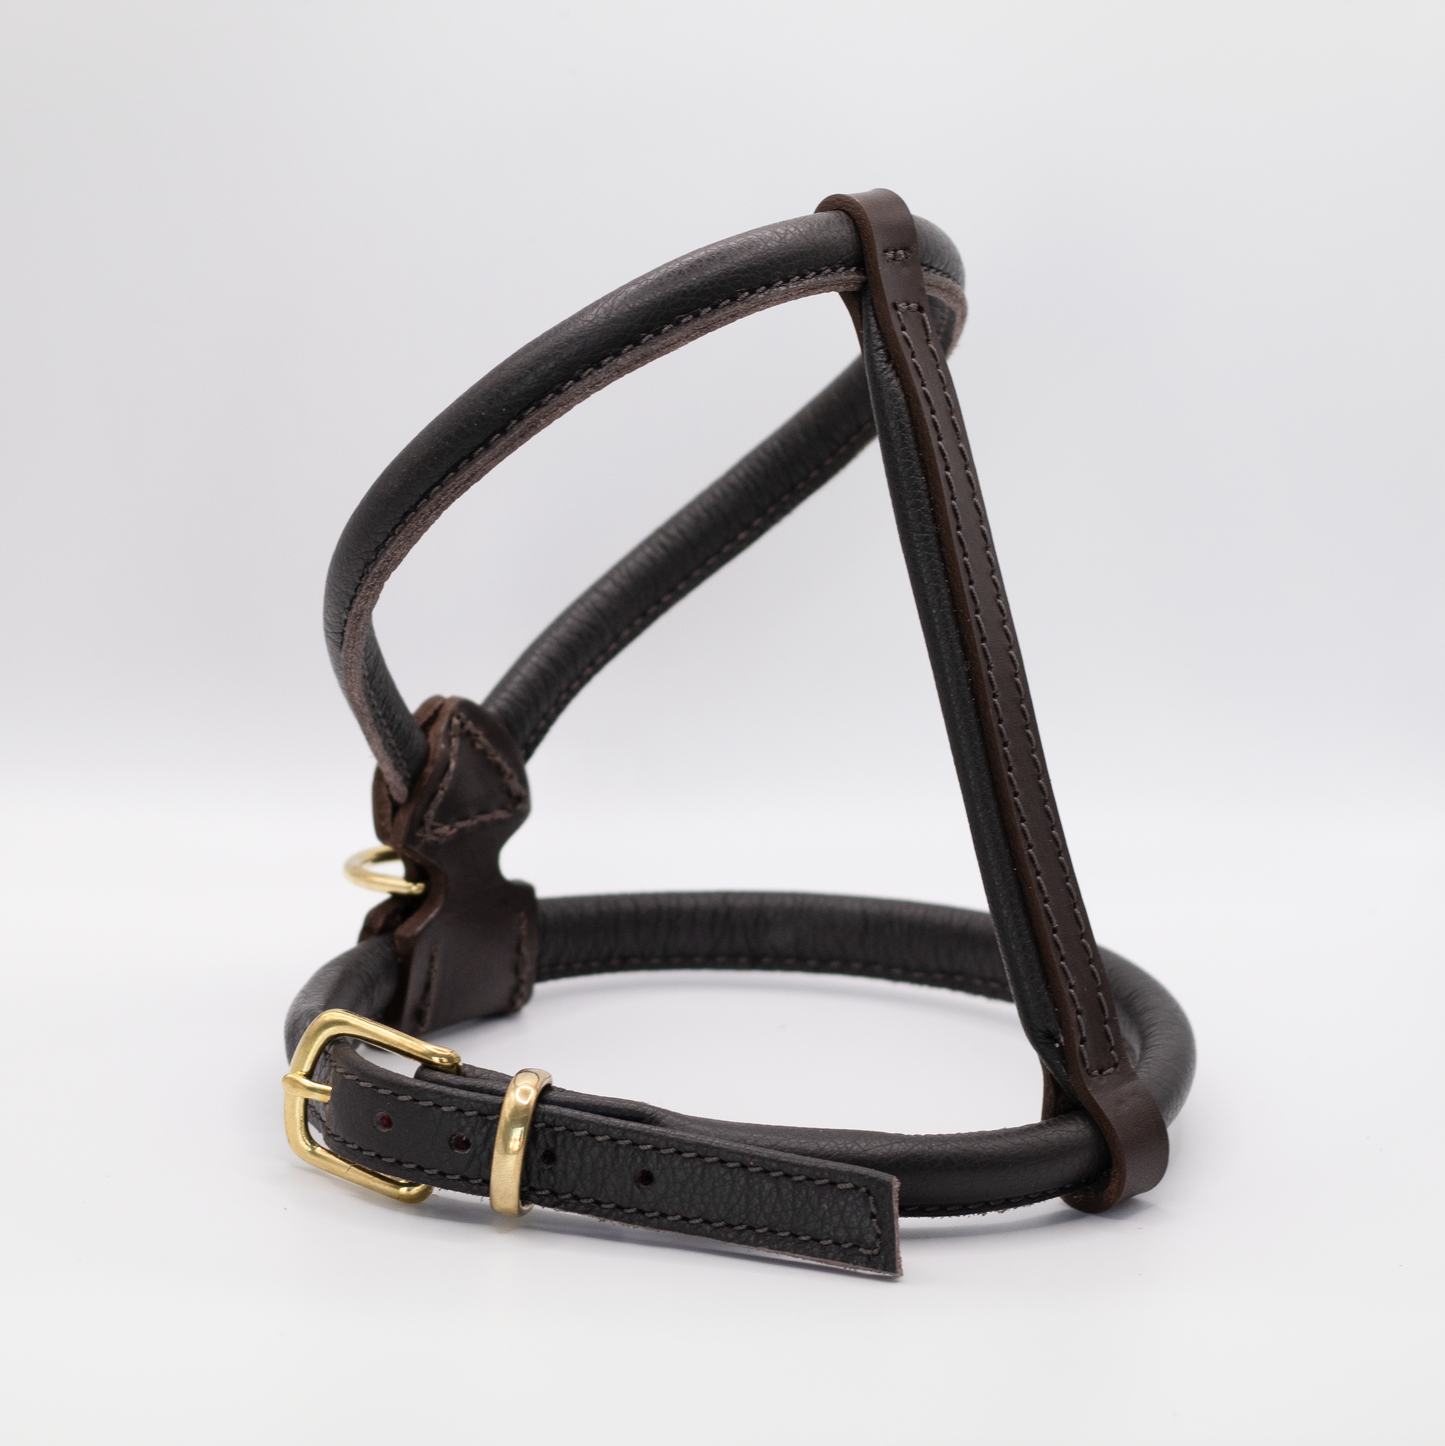 D&H Rolled Leather Dog Harness Brown